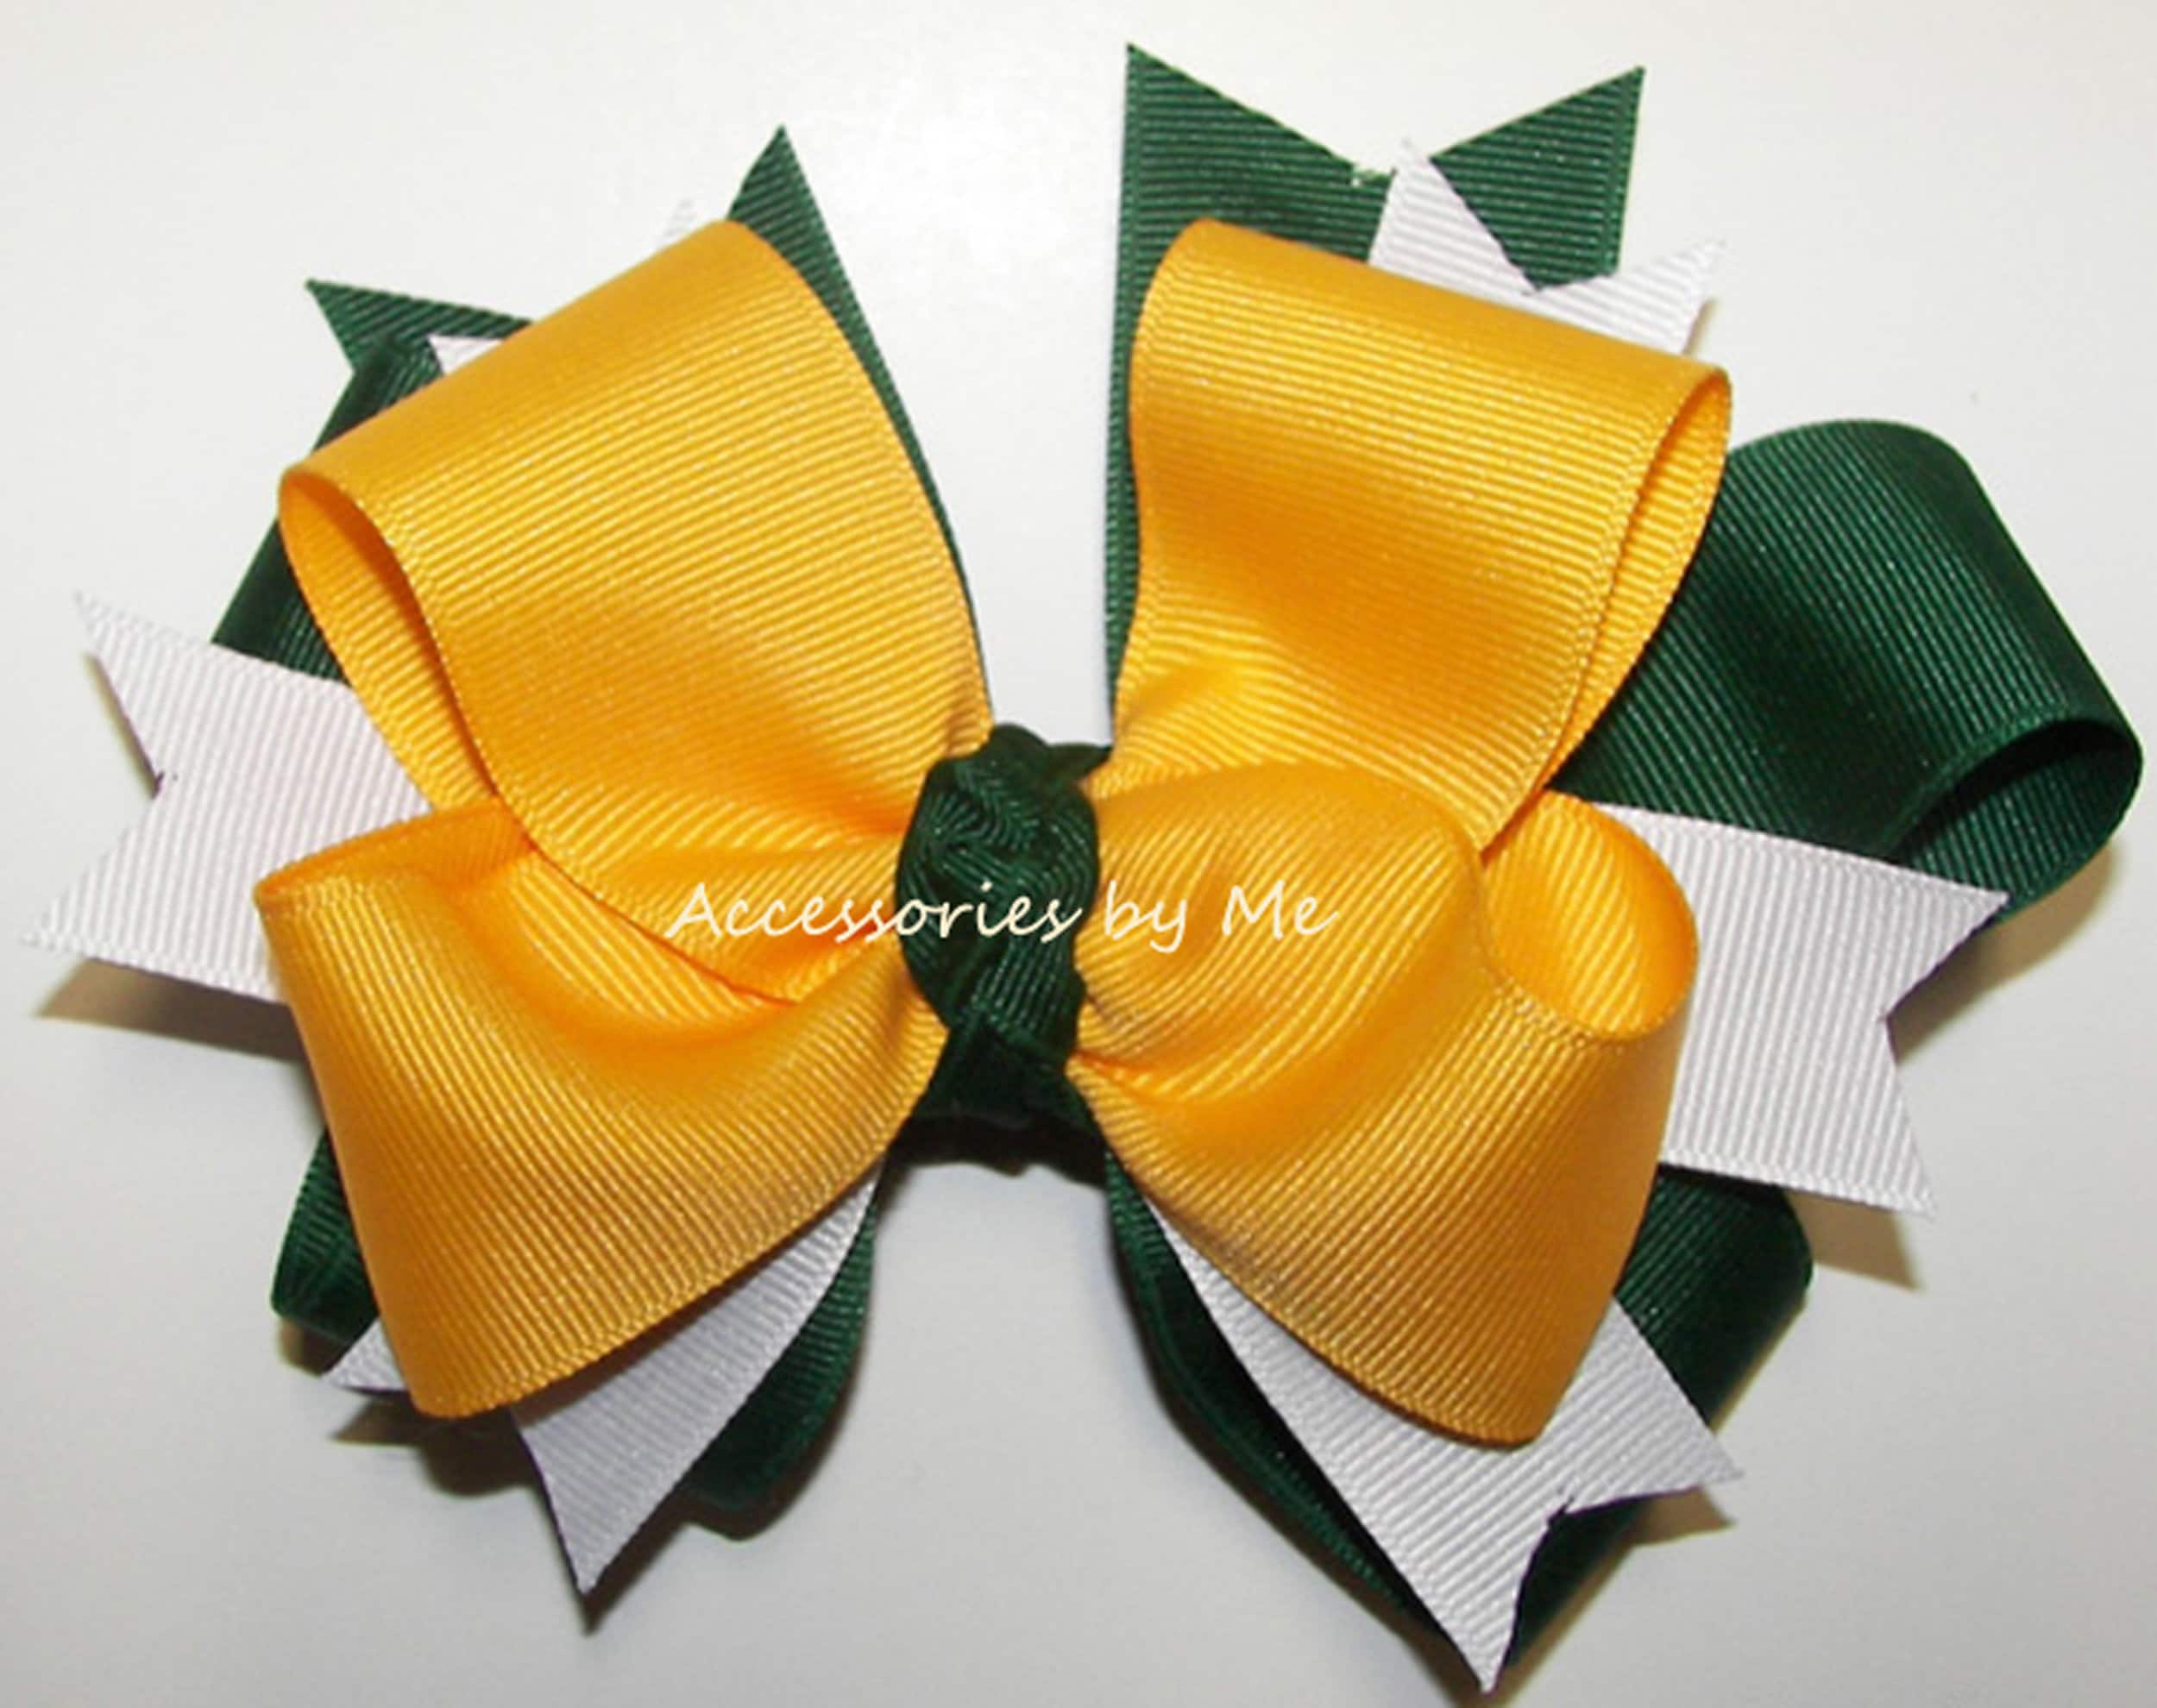 Essentials Collegiate Cheer Bow | College Level Cheer Bow | Varsity Cheer  Bow